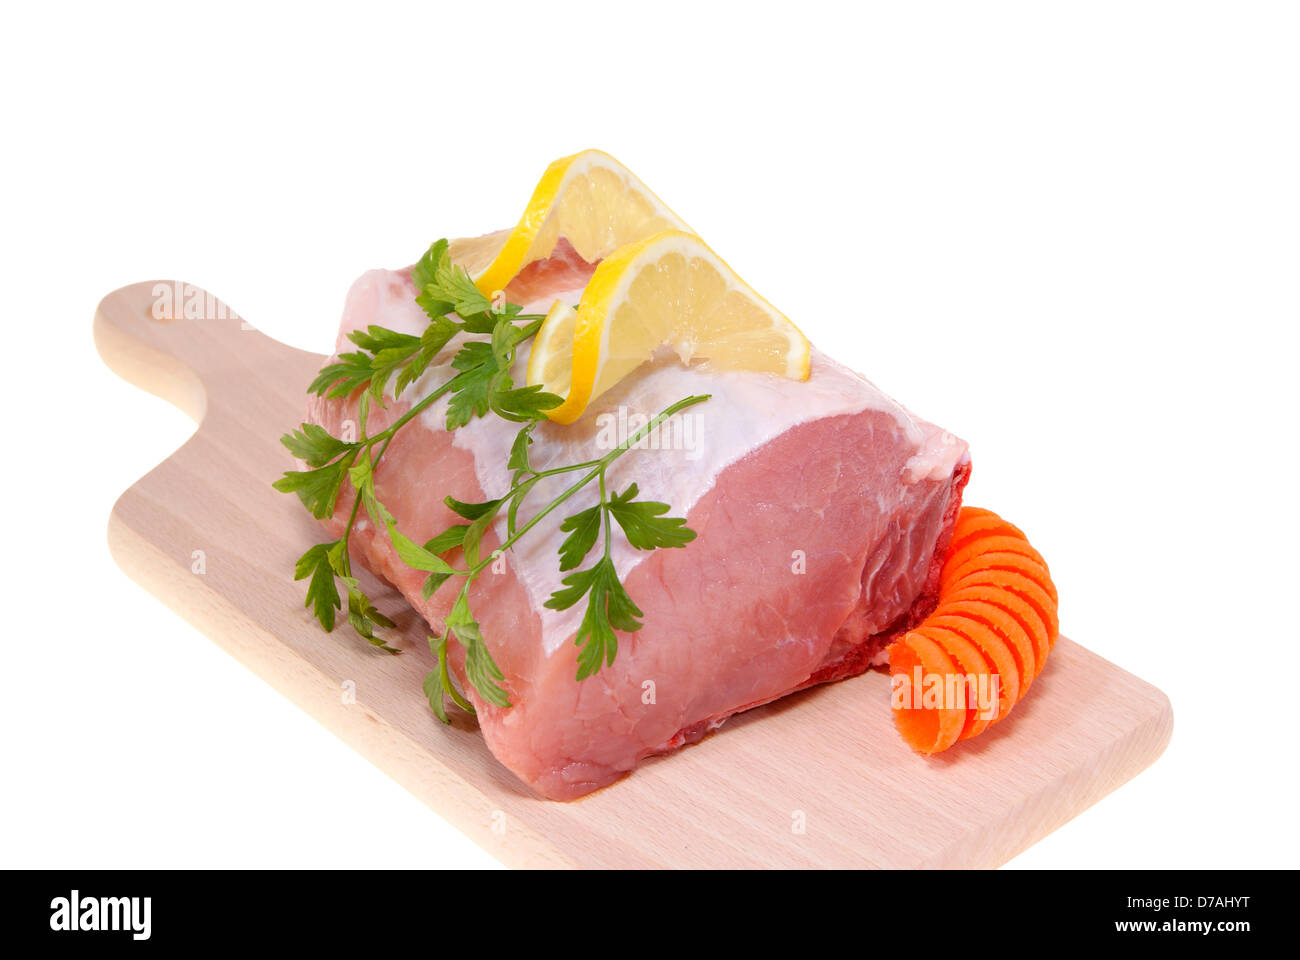 part of pork loin on desk-board isolated on white background Stock Photo